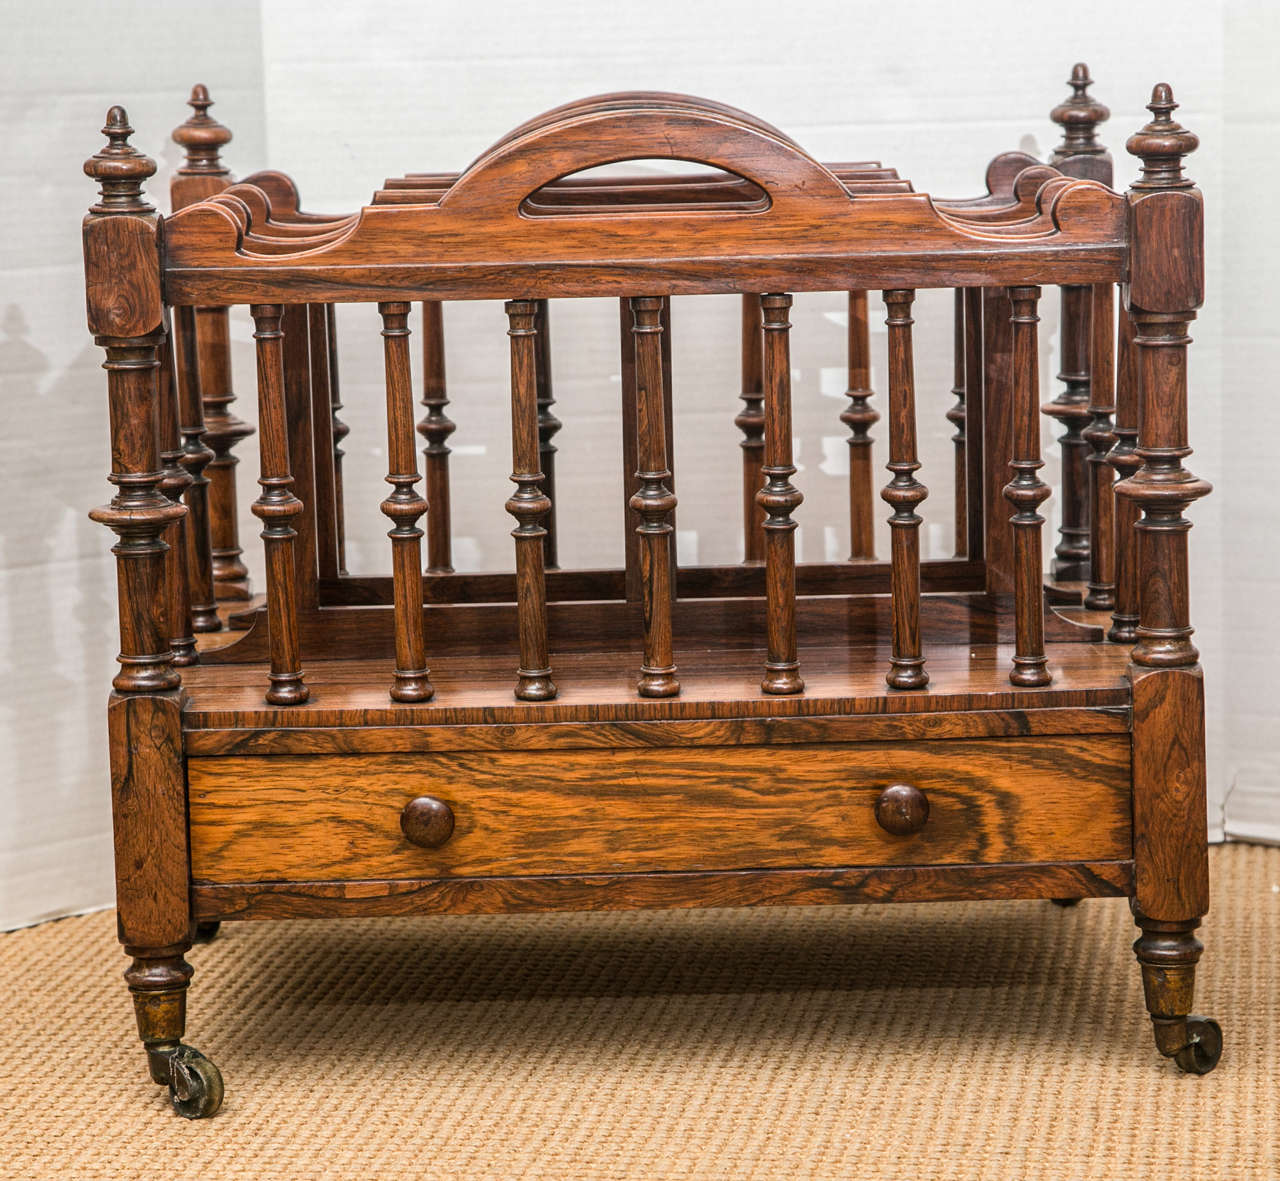 A handsome three-section Canterbury with four pierced handles, turned columns, a lower drawer, and original casters.